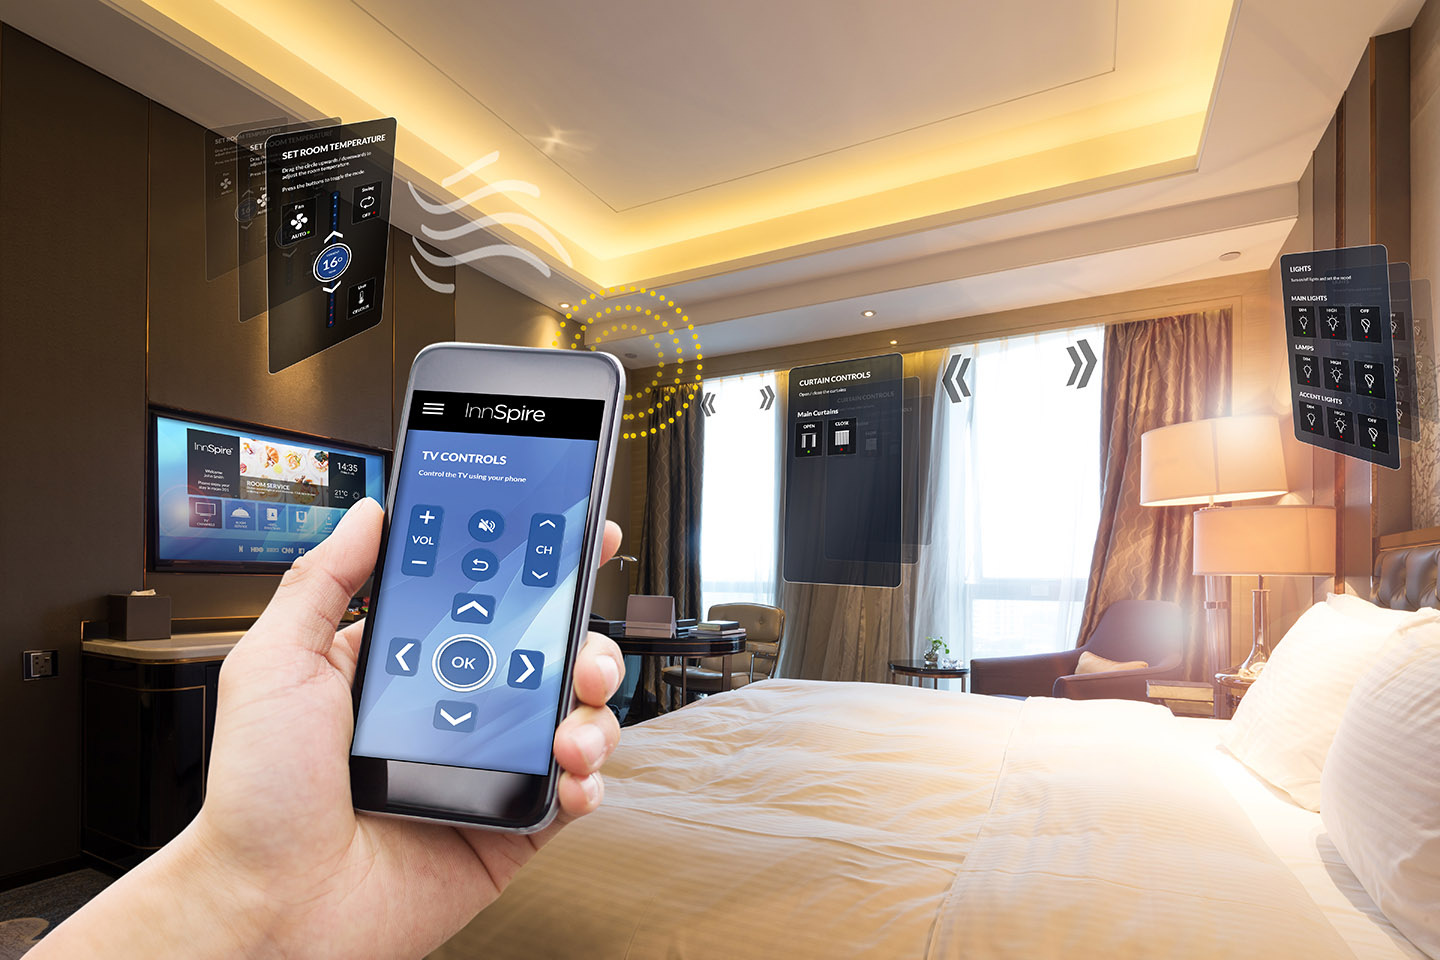 Virtual Remote Control for Hotels for post Covid-19